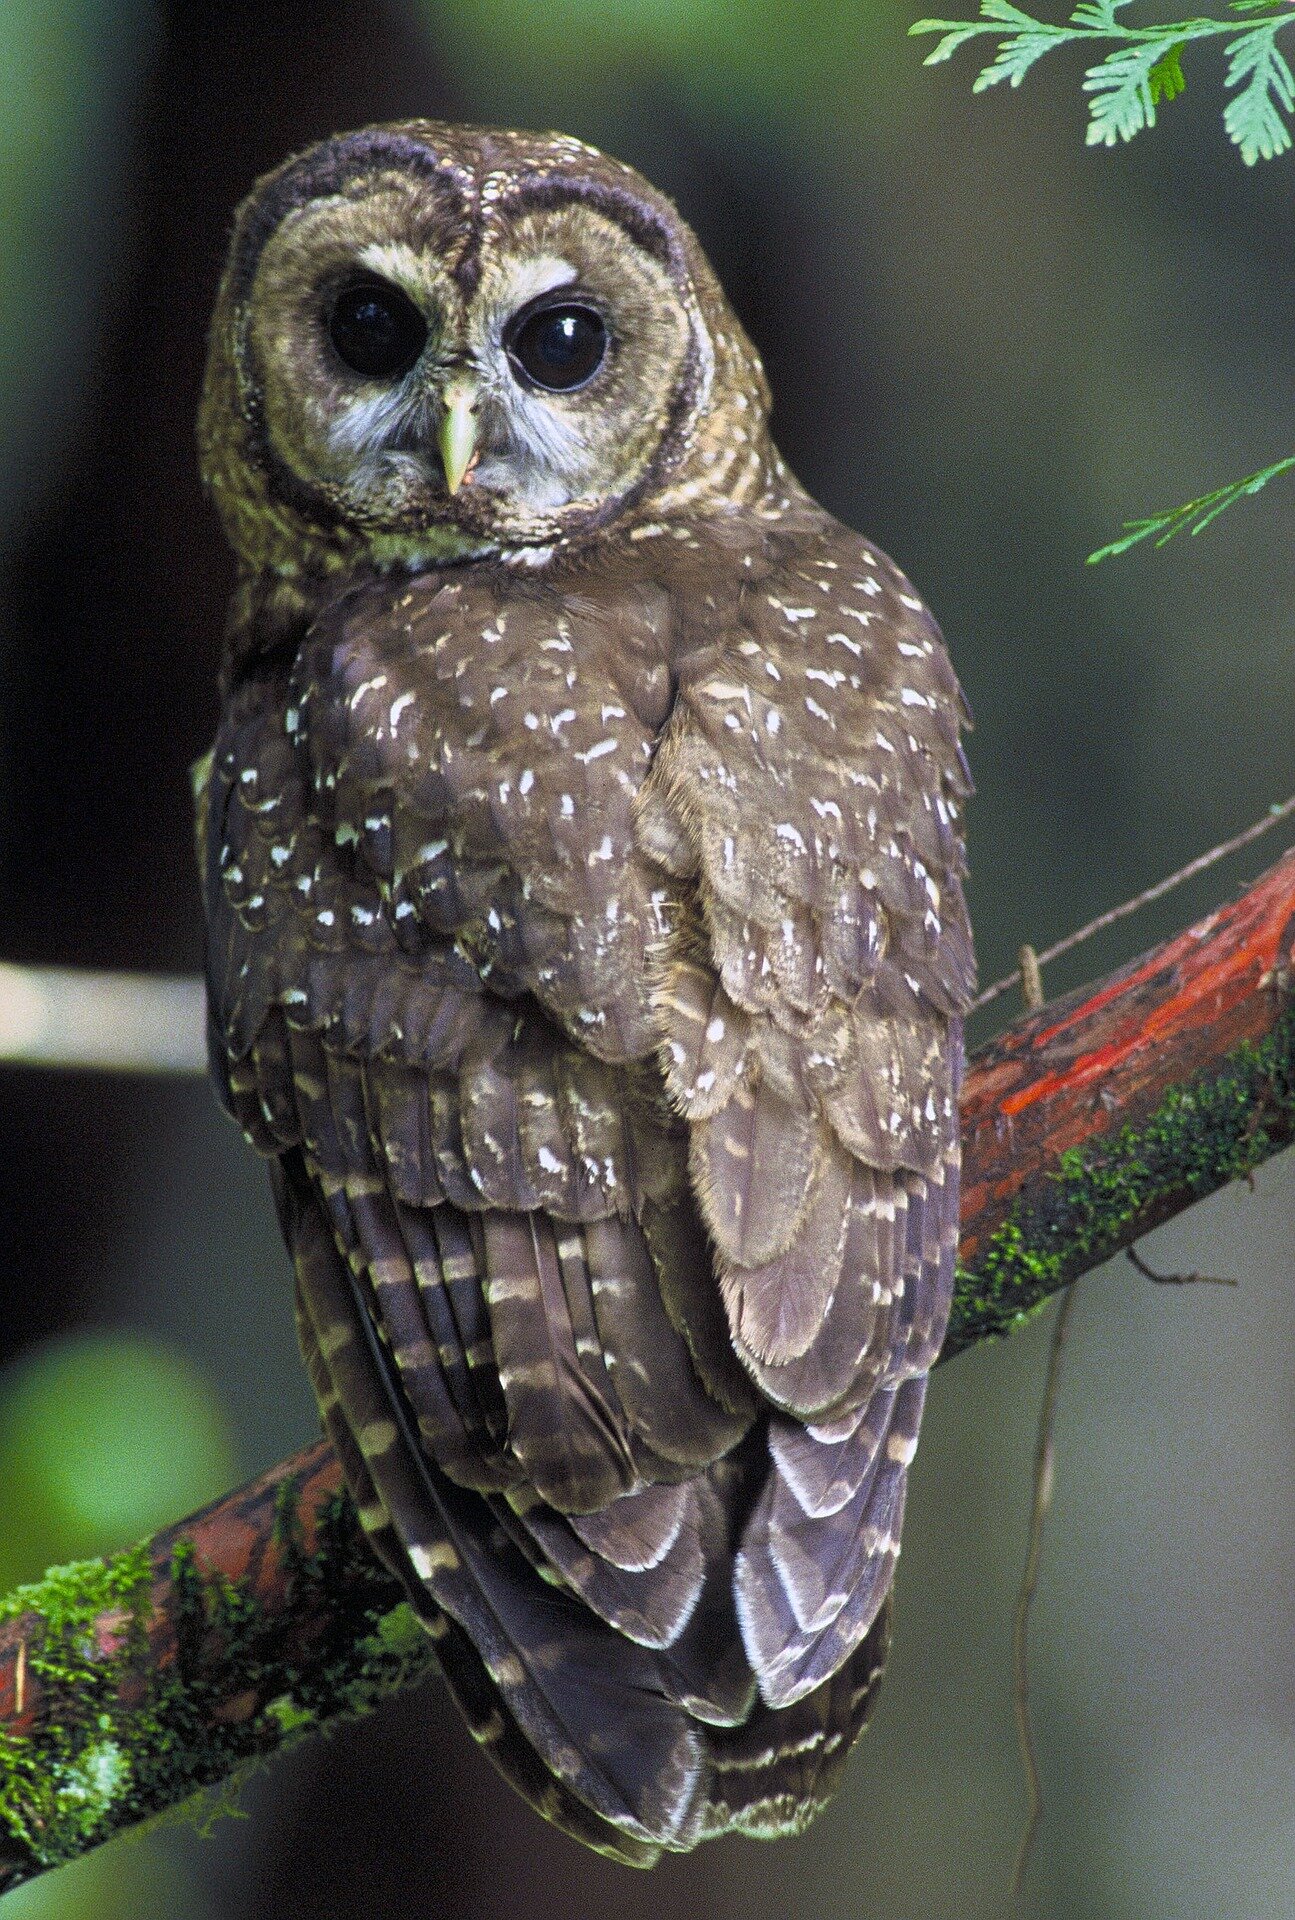 #Kill barred owls so spotted owls can live? Wildlife service should put plan on hold say conservation groups